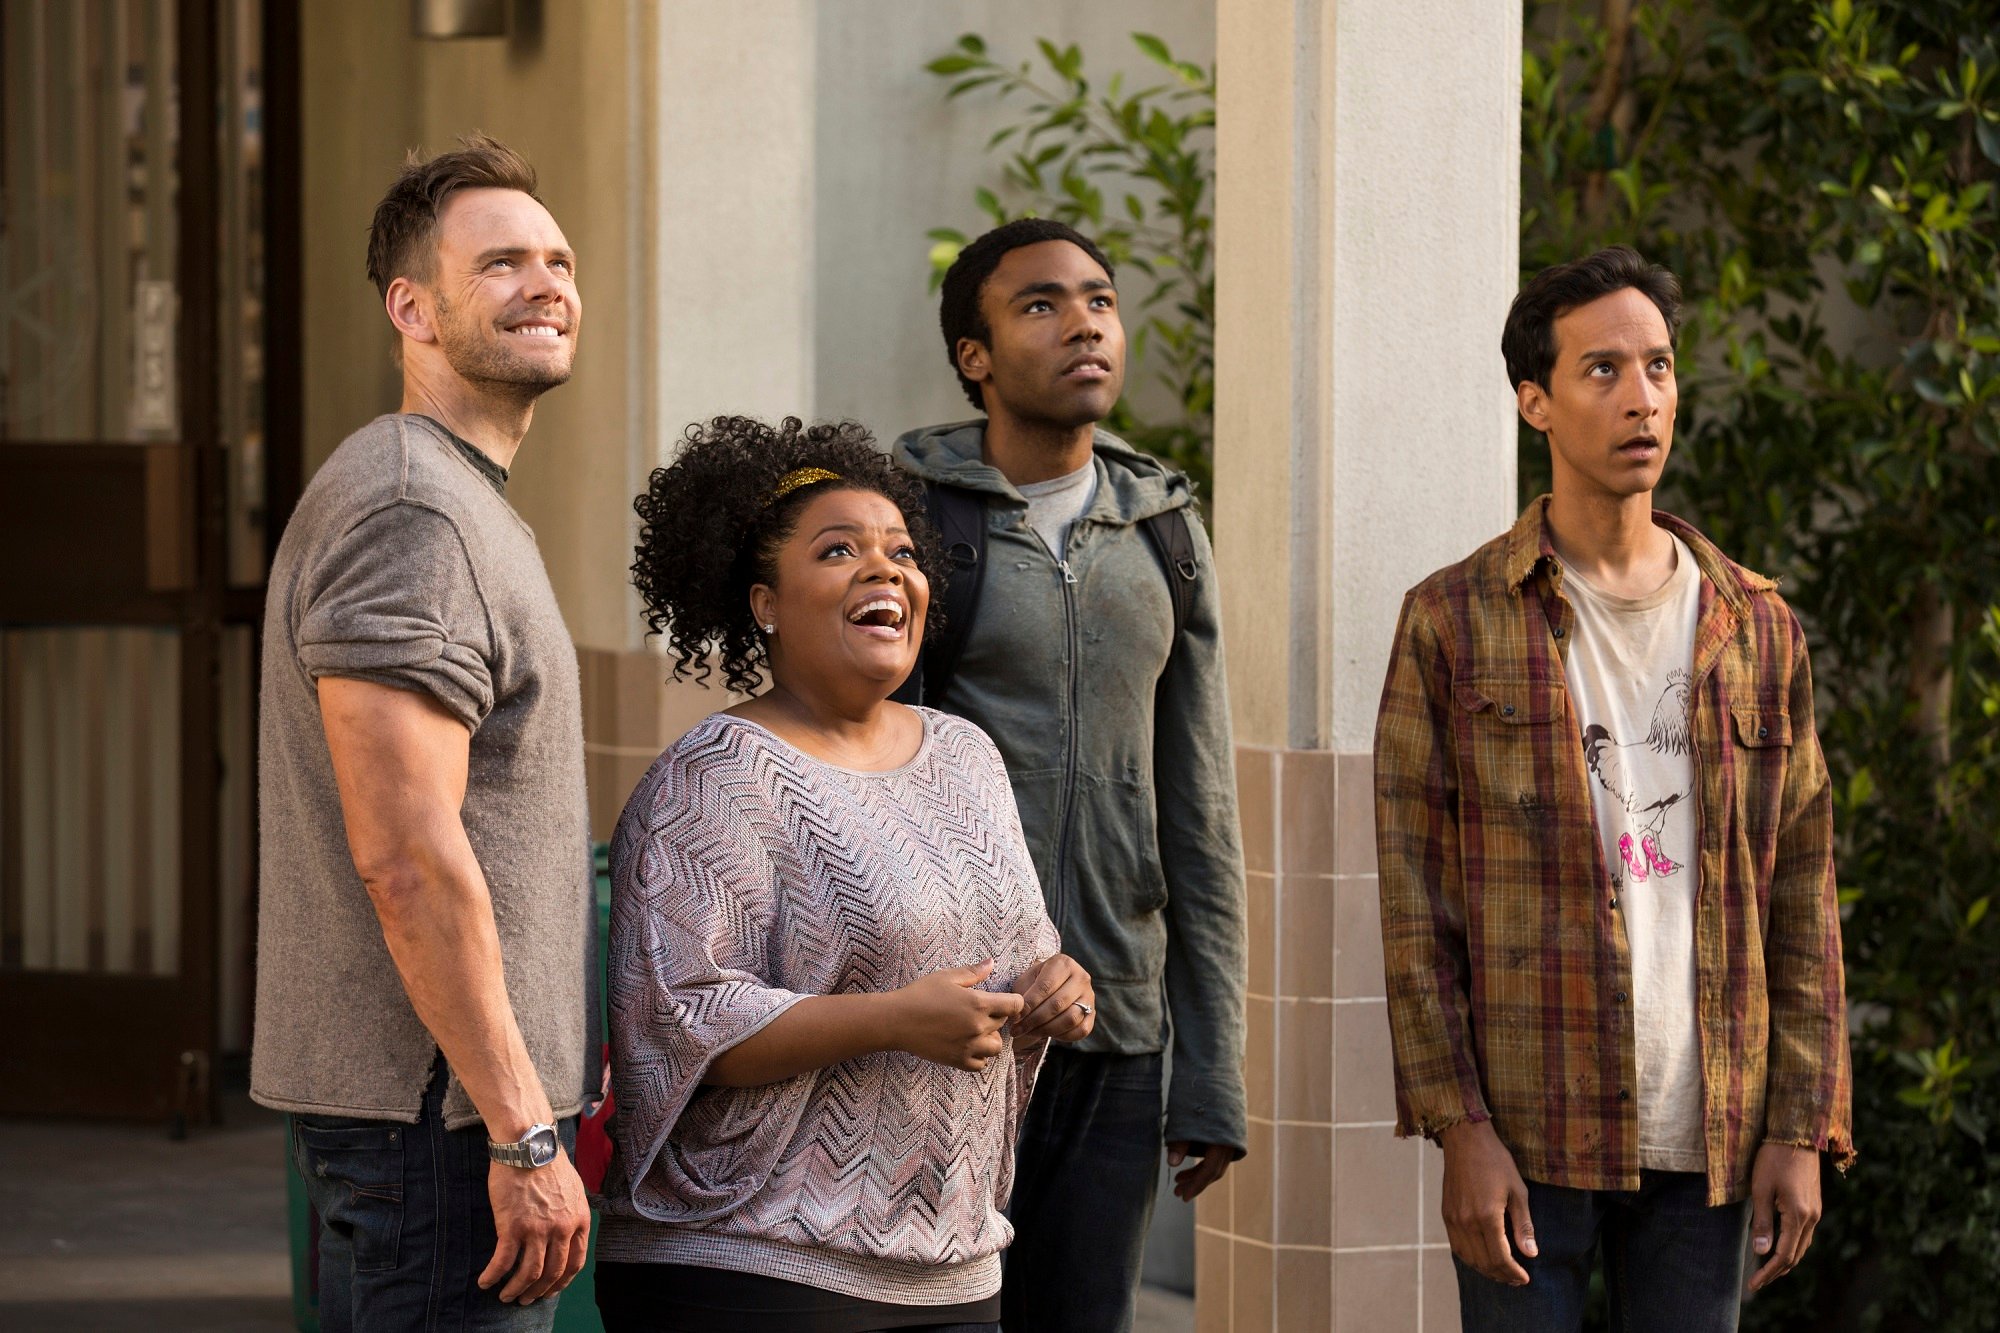 (l-r) Joel McHale as Jeff, Yvette Nicole Brown as Shirley, Donald Glover as Troy, Danny Pudi as Abed